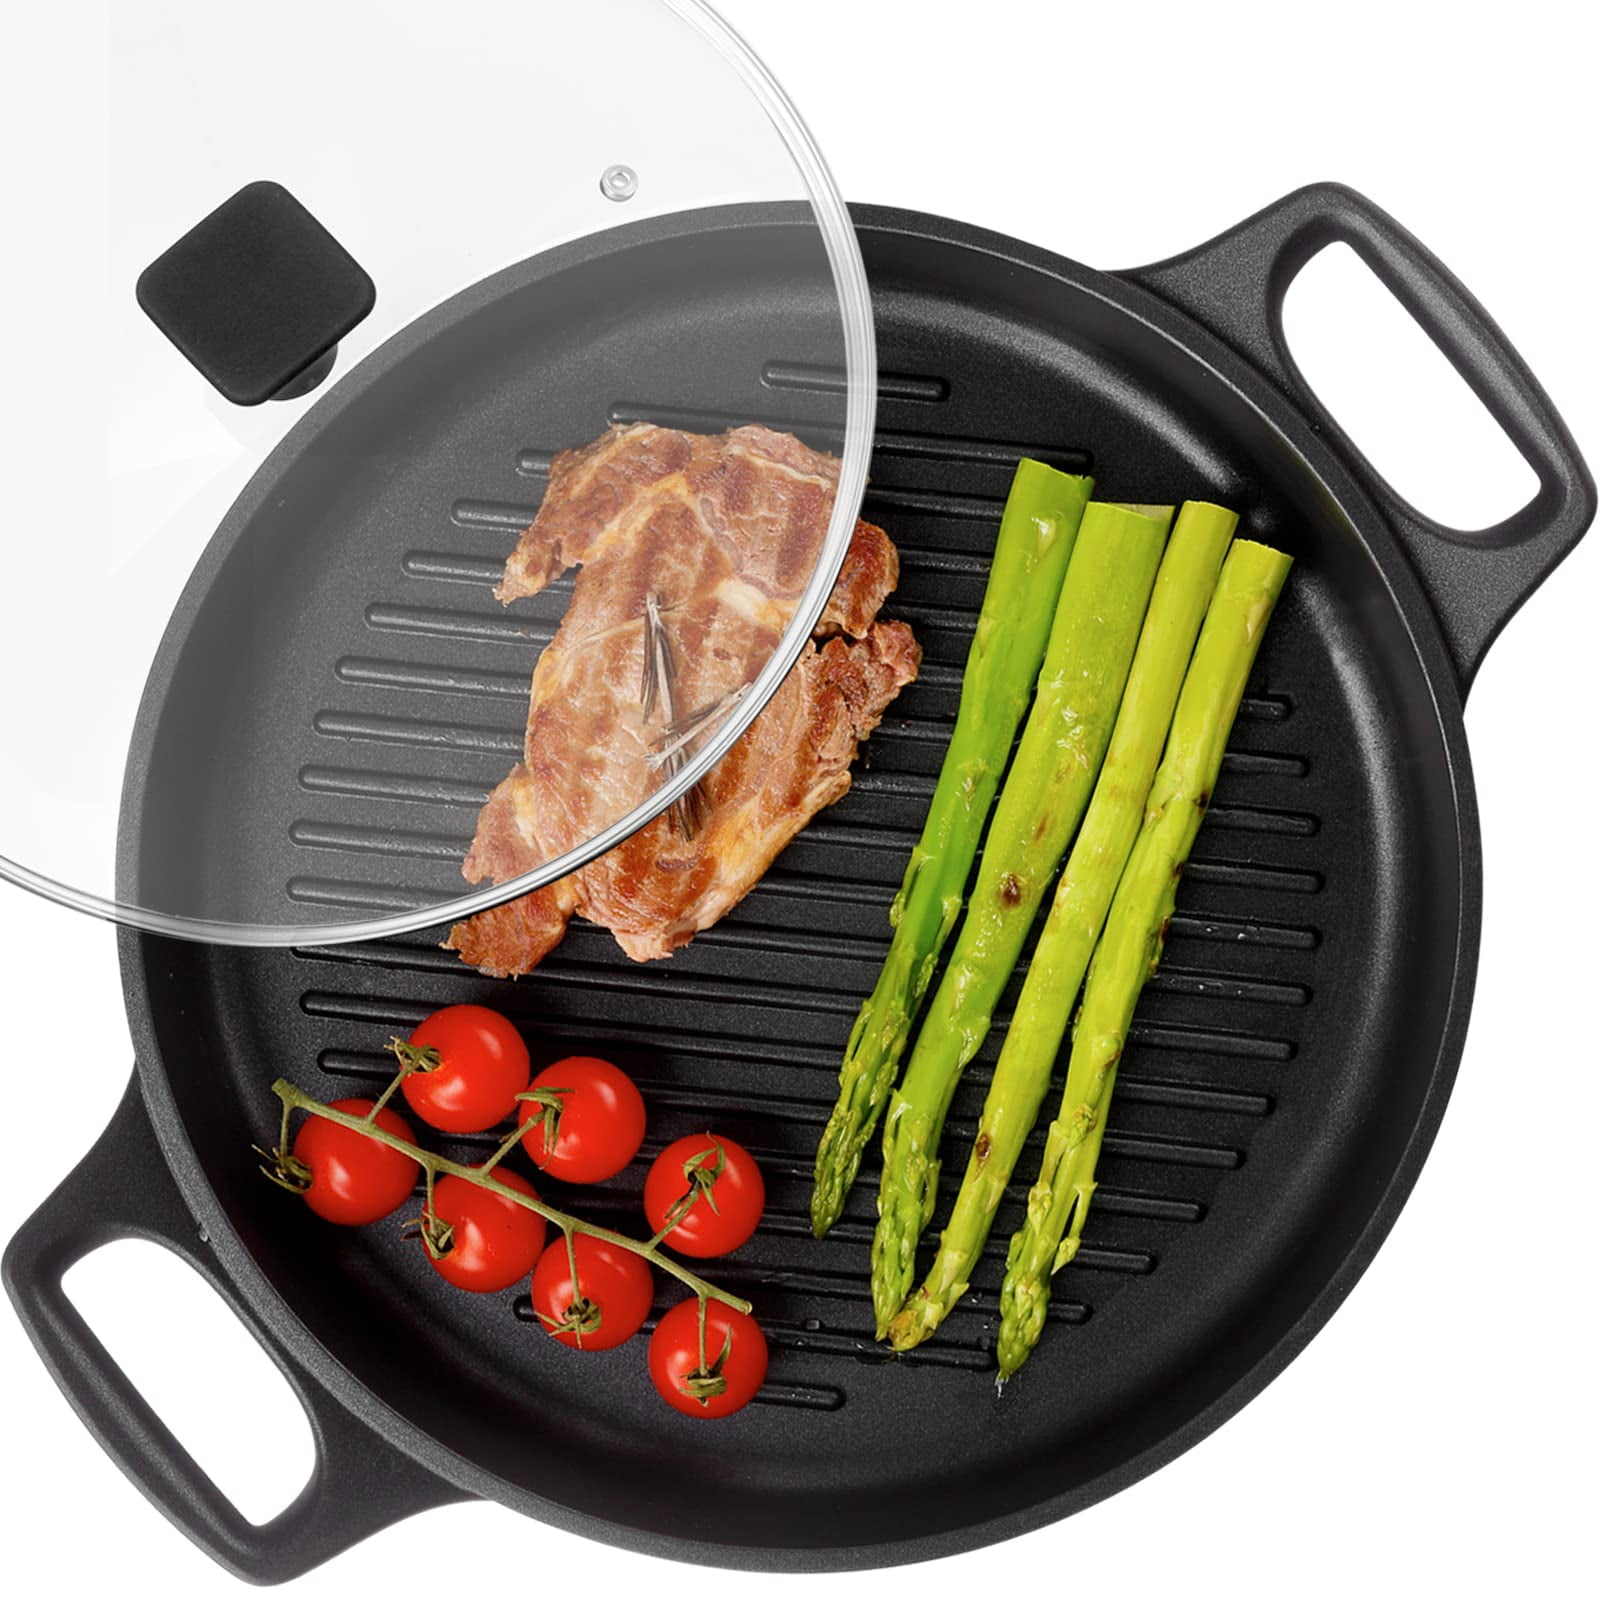 Max K 2-in-1 Cast Iron Grill & Griddle - Pre-Seasoned Reversible Grilling Plate - Oven, Campfire, Double Burner Stove Top Skillet - with Handles, Grea